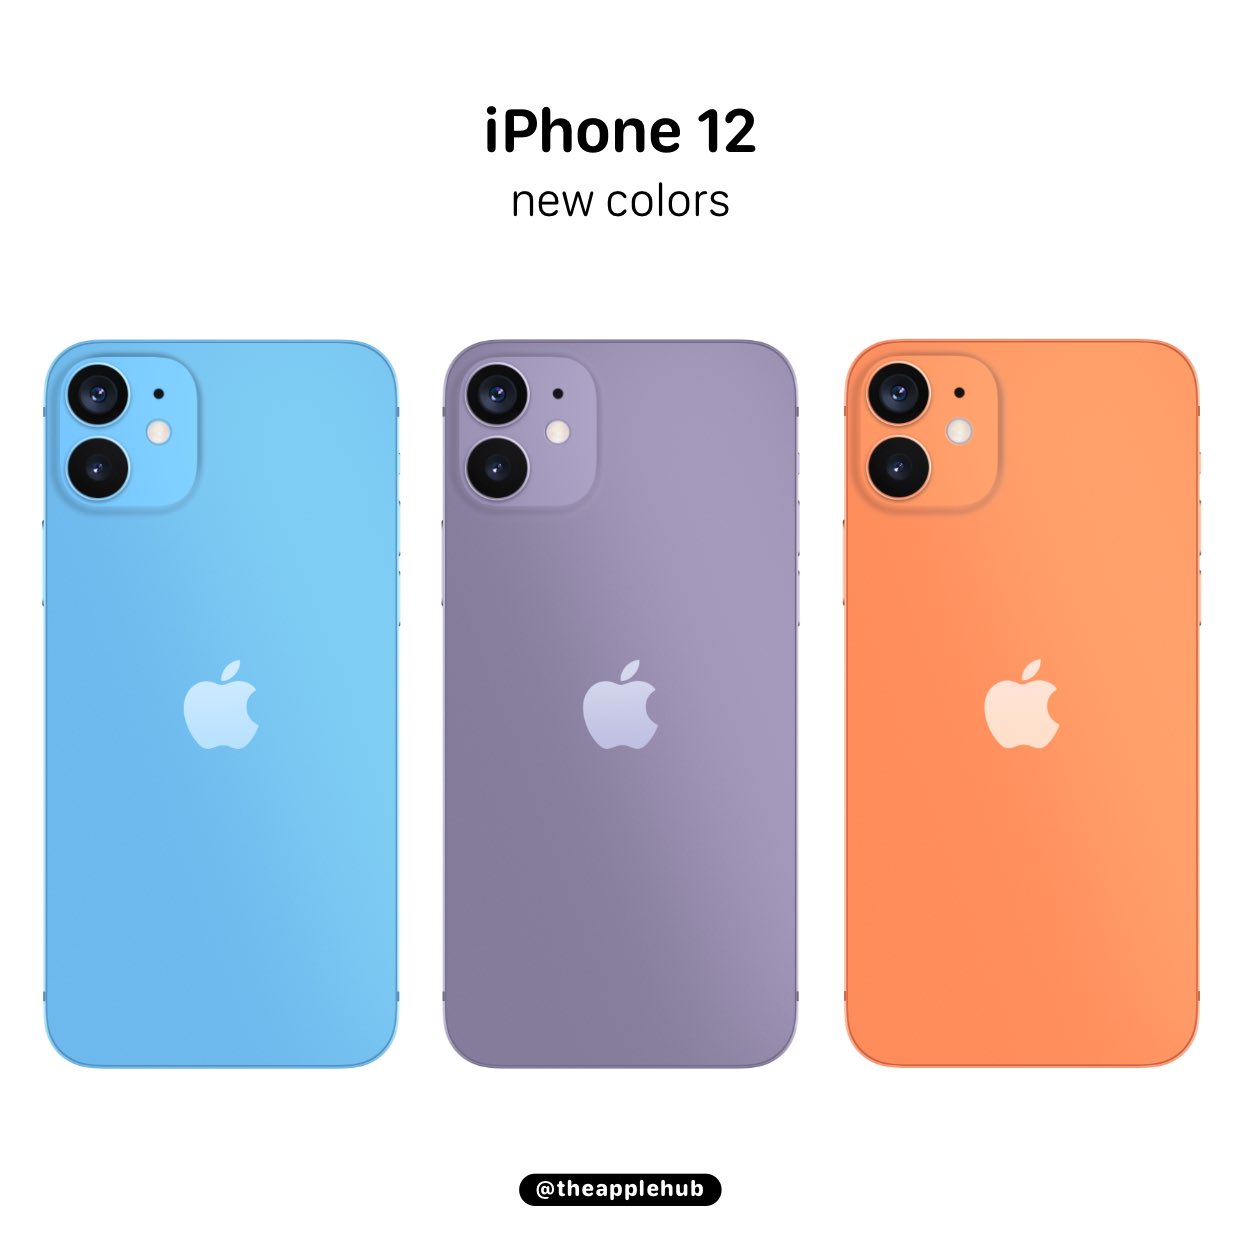 Apple Hub According To Everyapplepro And Maxwinebach Apple Is Working On New Colors For The Iphone 12 Including A Light Blue Violet Shade And Light Orange Out Of Those Colors